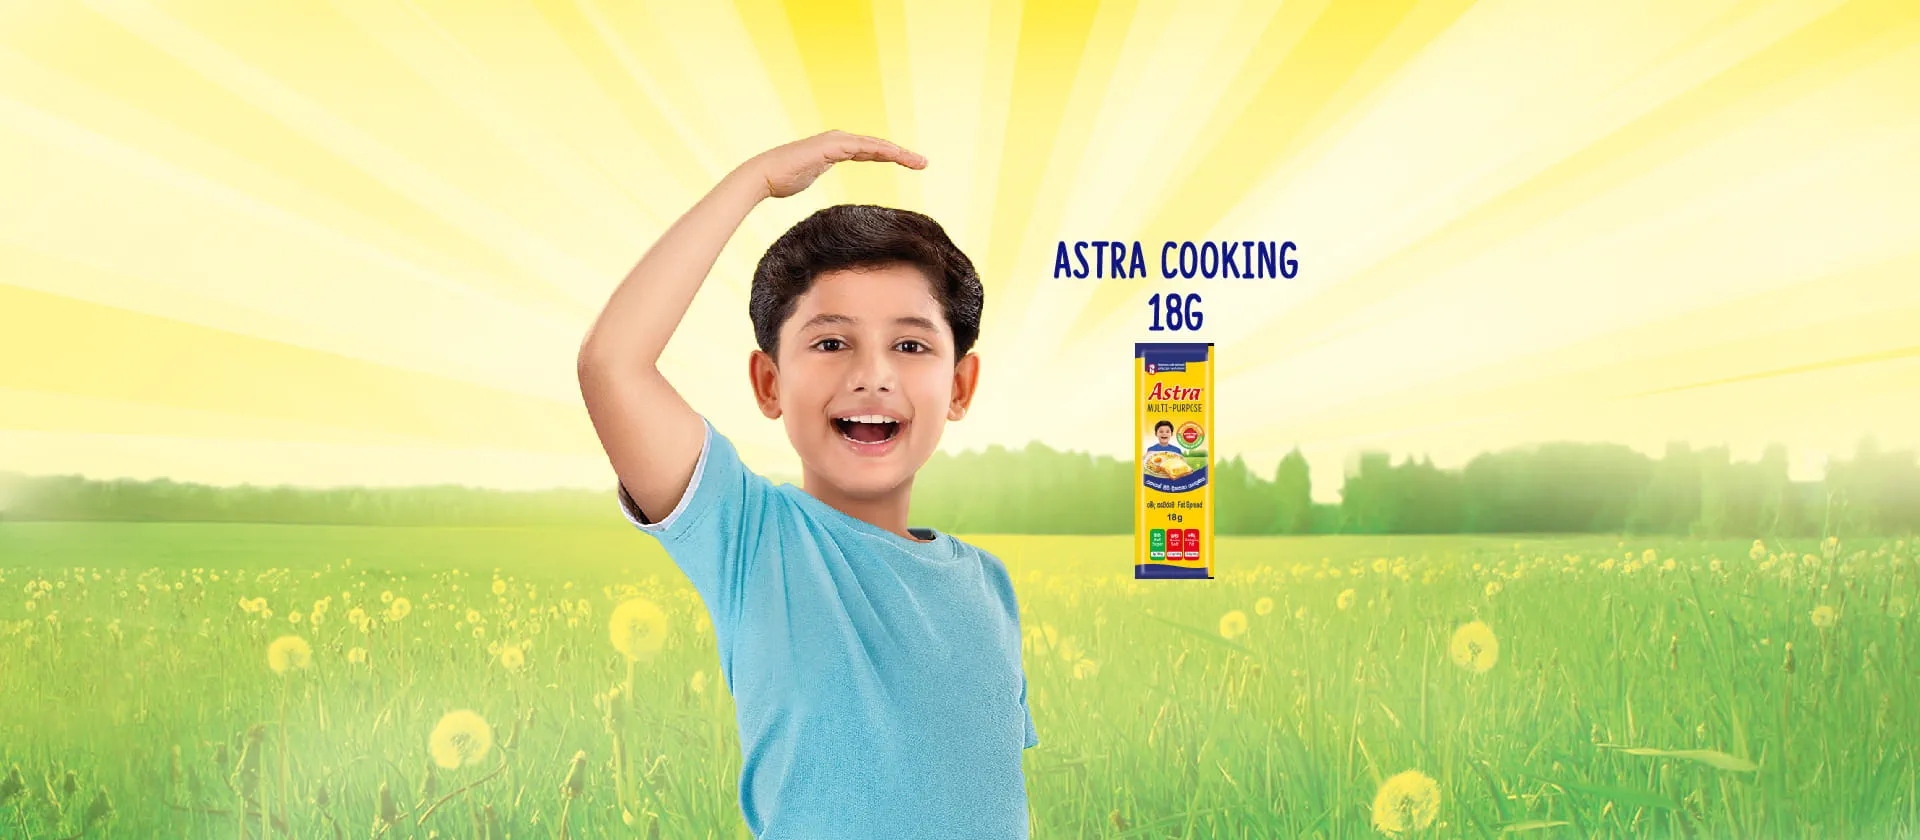 Astra Cooking 18g